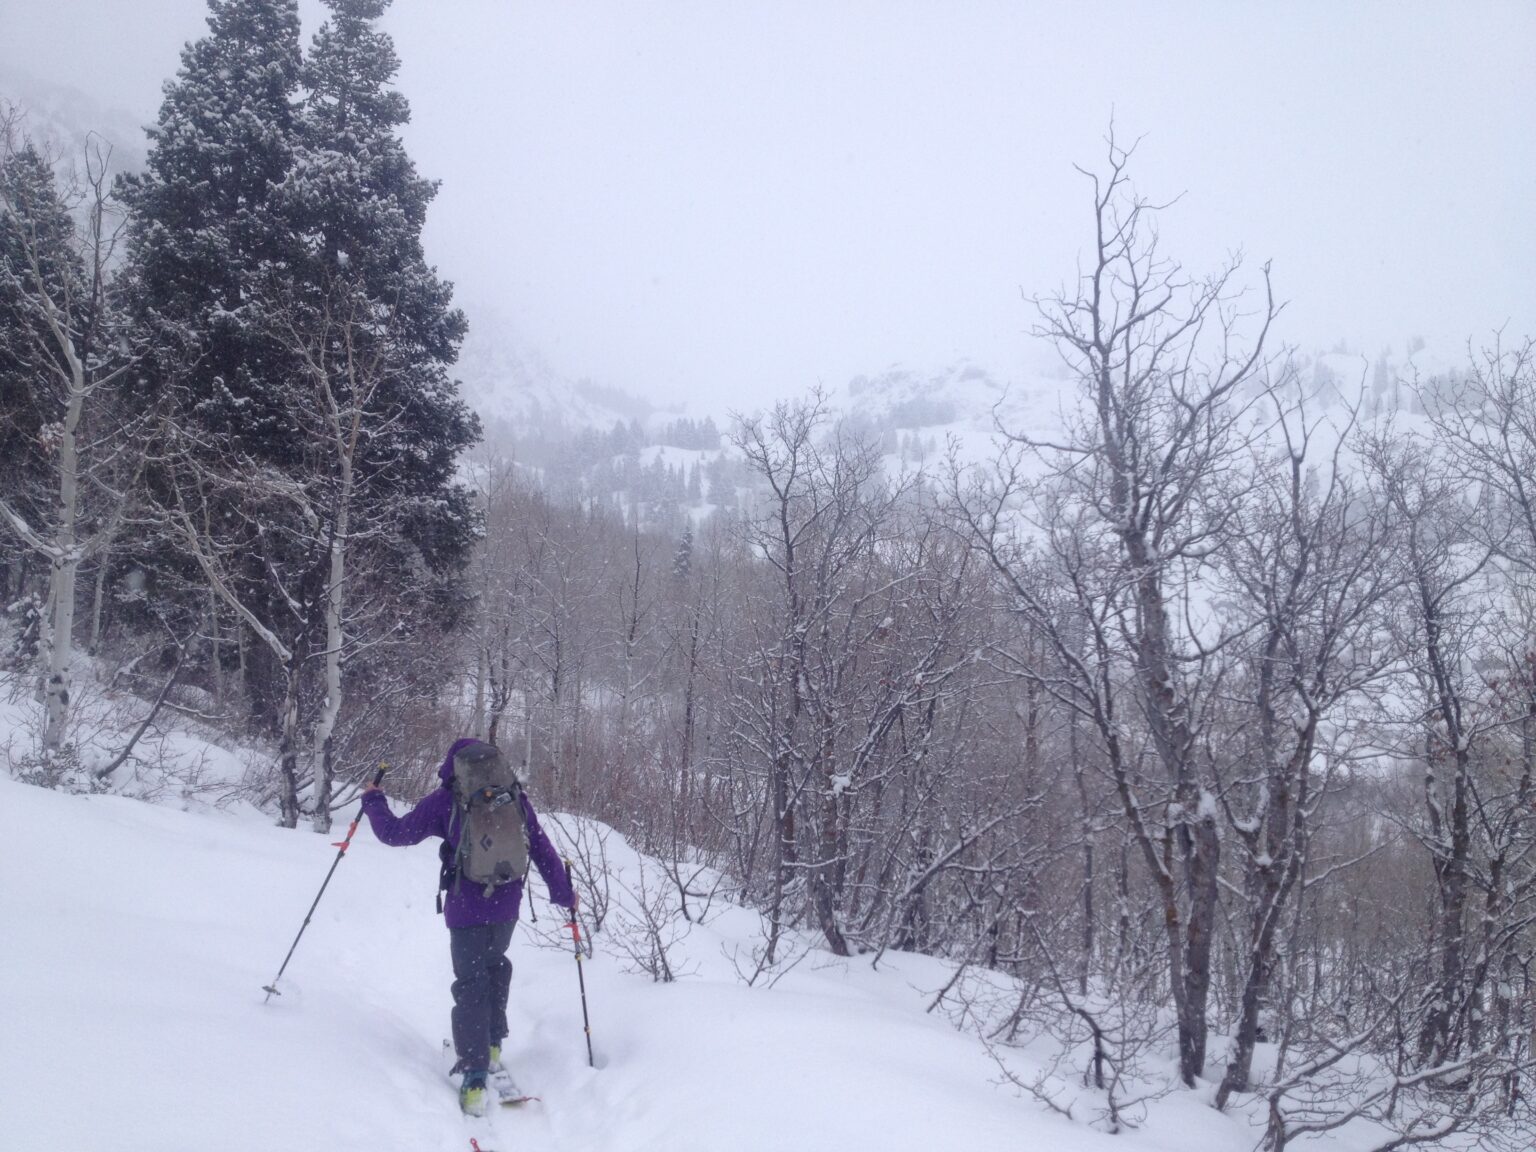 Ski touring up the Blanche Lake Trail in the Wasatch Mountains